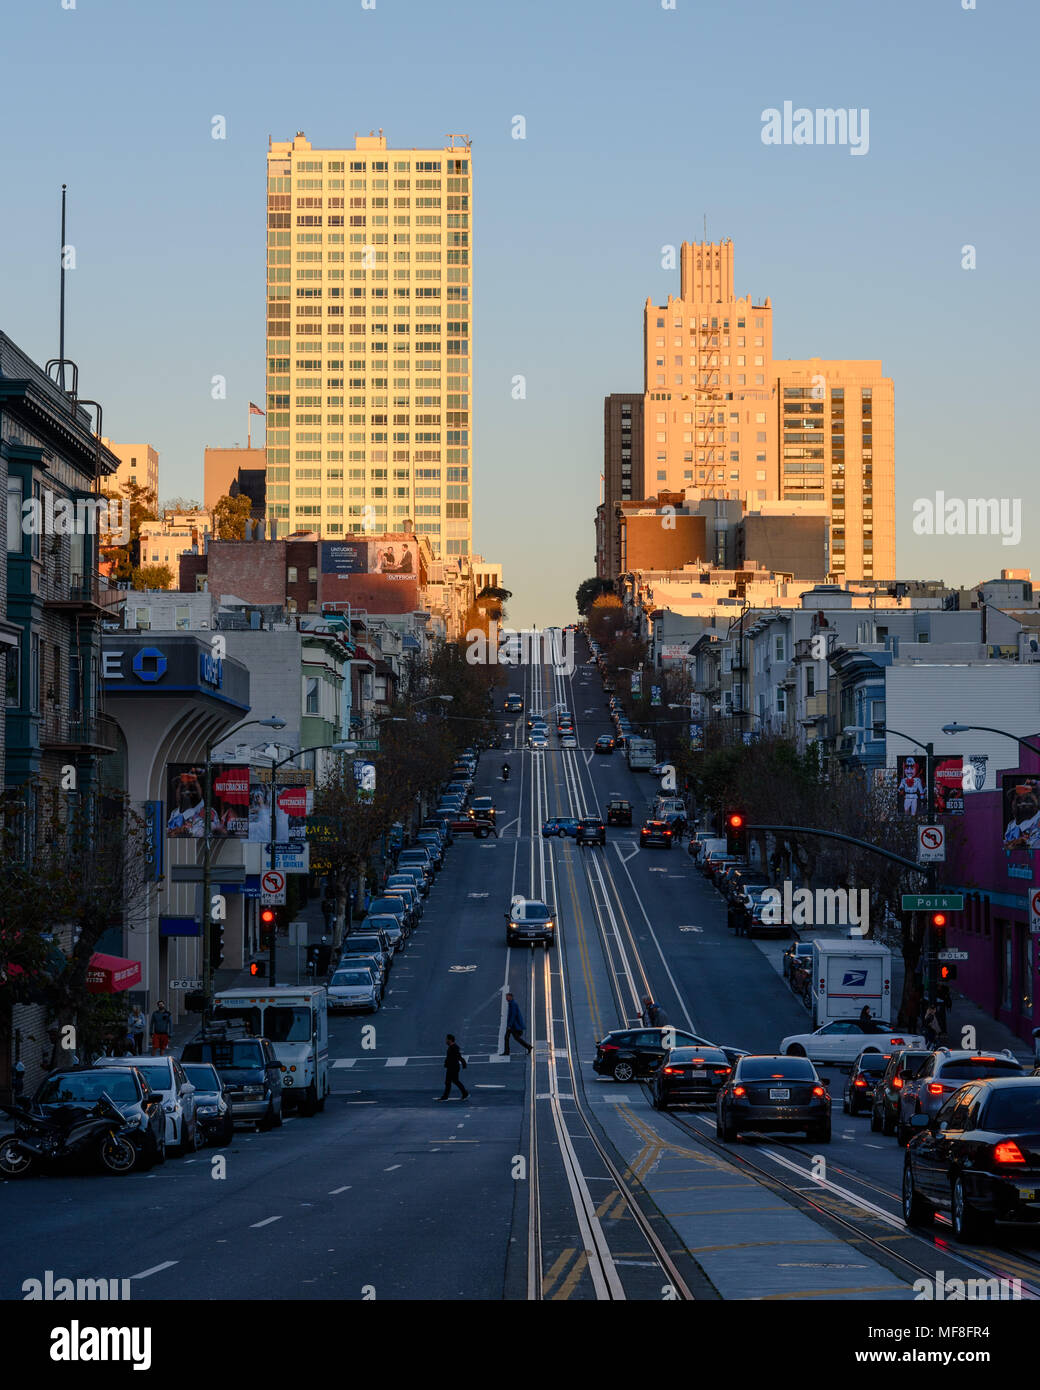 Looking towards Nob Hill from California Street in San Francisco with the cable car tracks Stock Photo